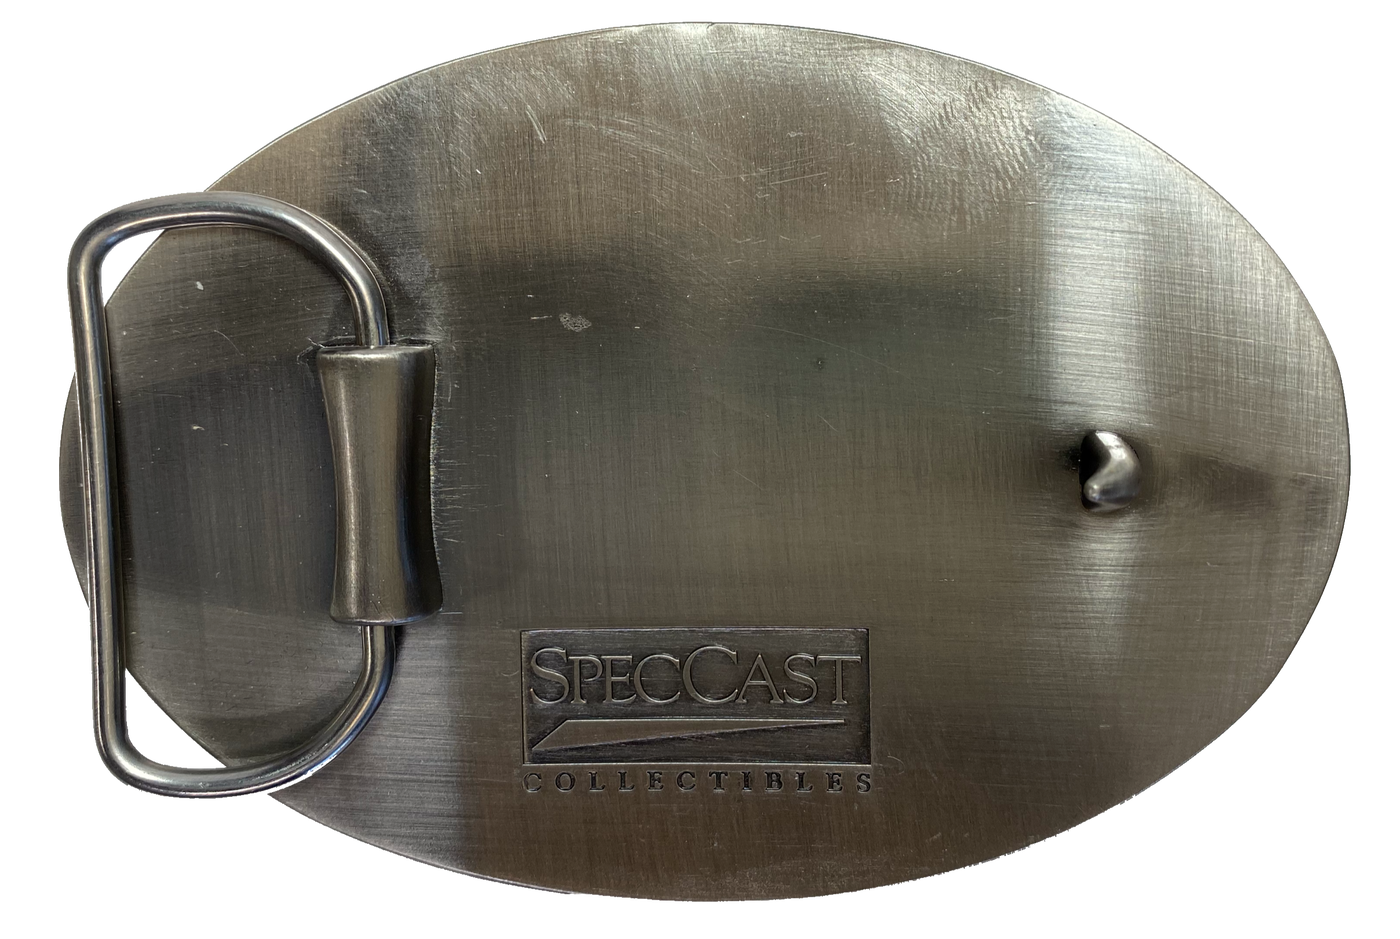 Case Western Tractor Belt Buckle-Oval Shape Licensed Case Western Buckle Fits 1 1/2 inch wide belts Approx. size 2 3/4"H x 3 3/4"W Available online and in our shop in Smyrna, TN, just outside of Nashville